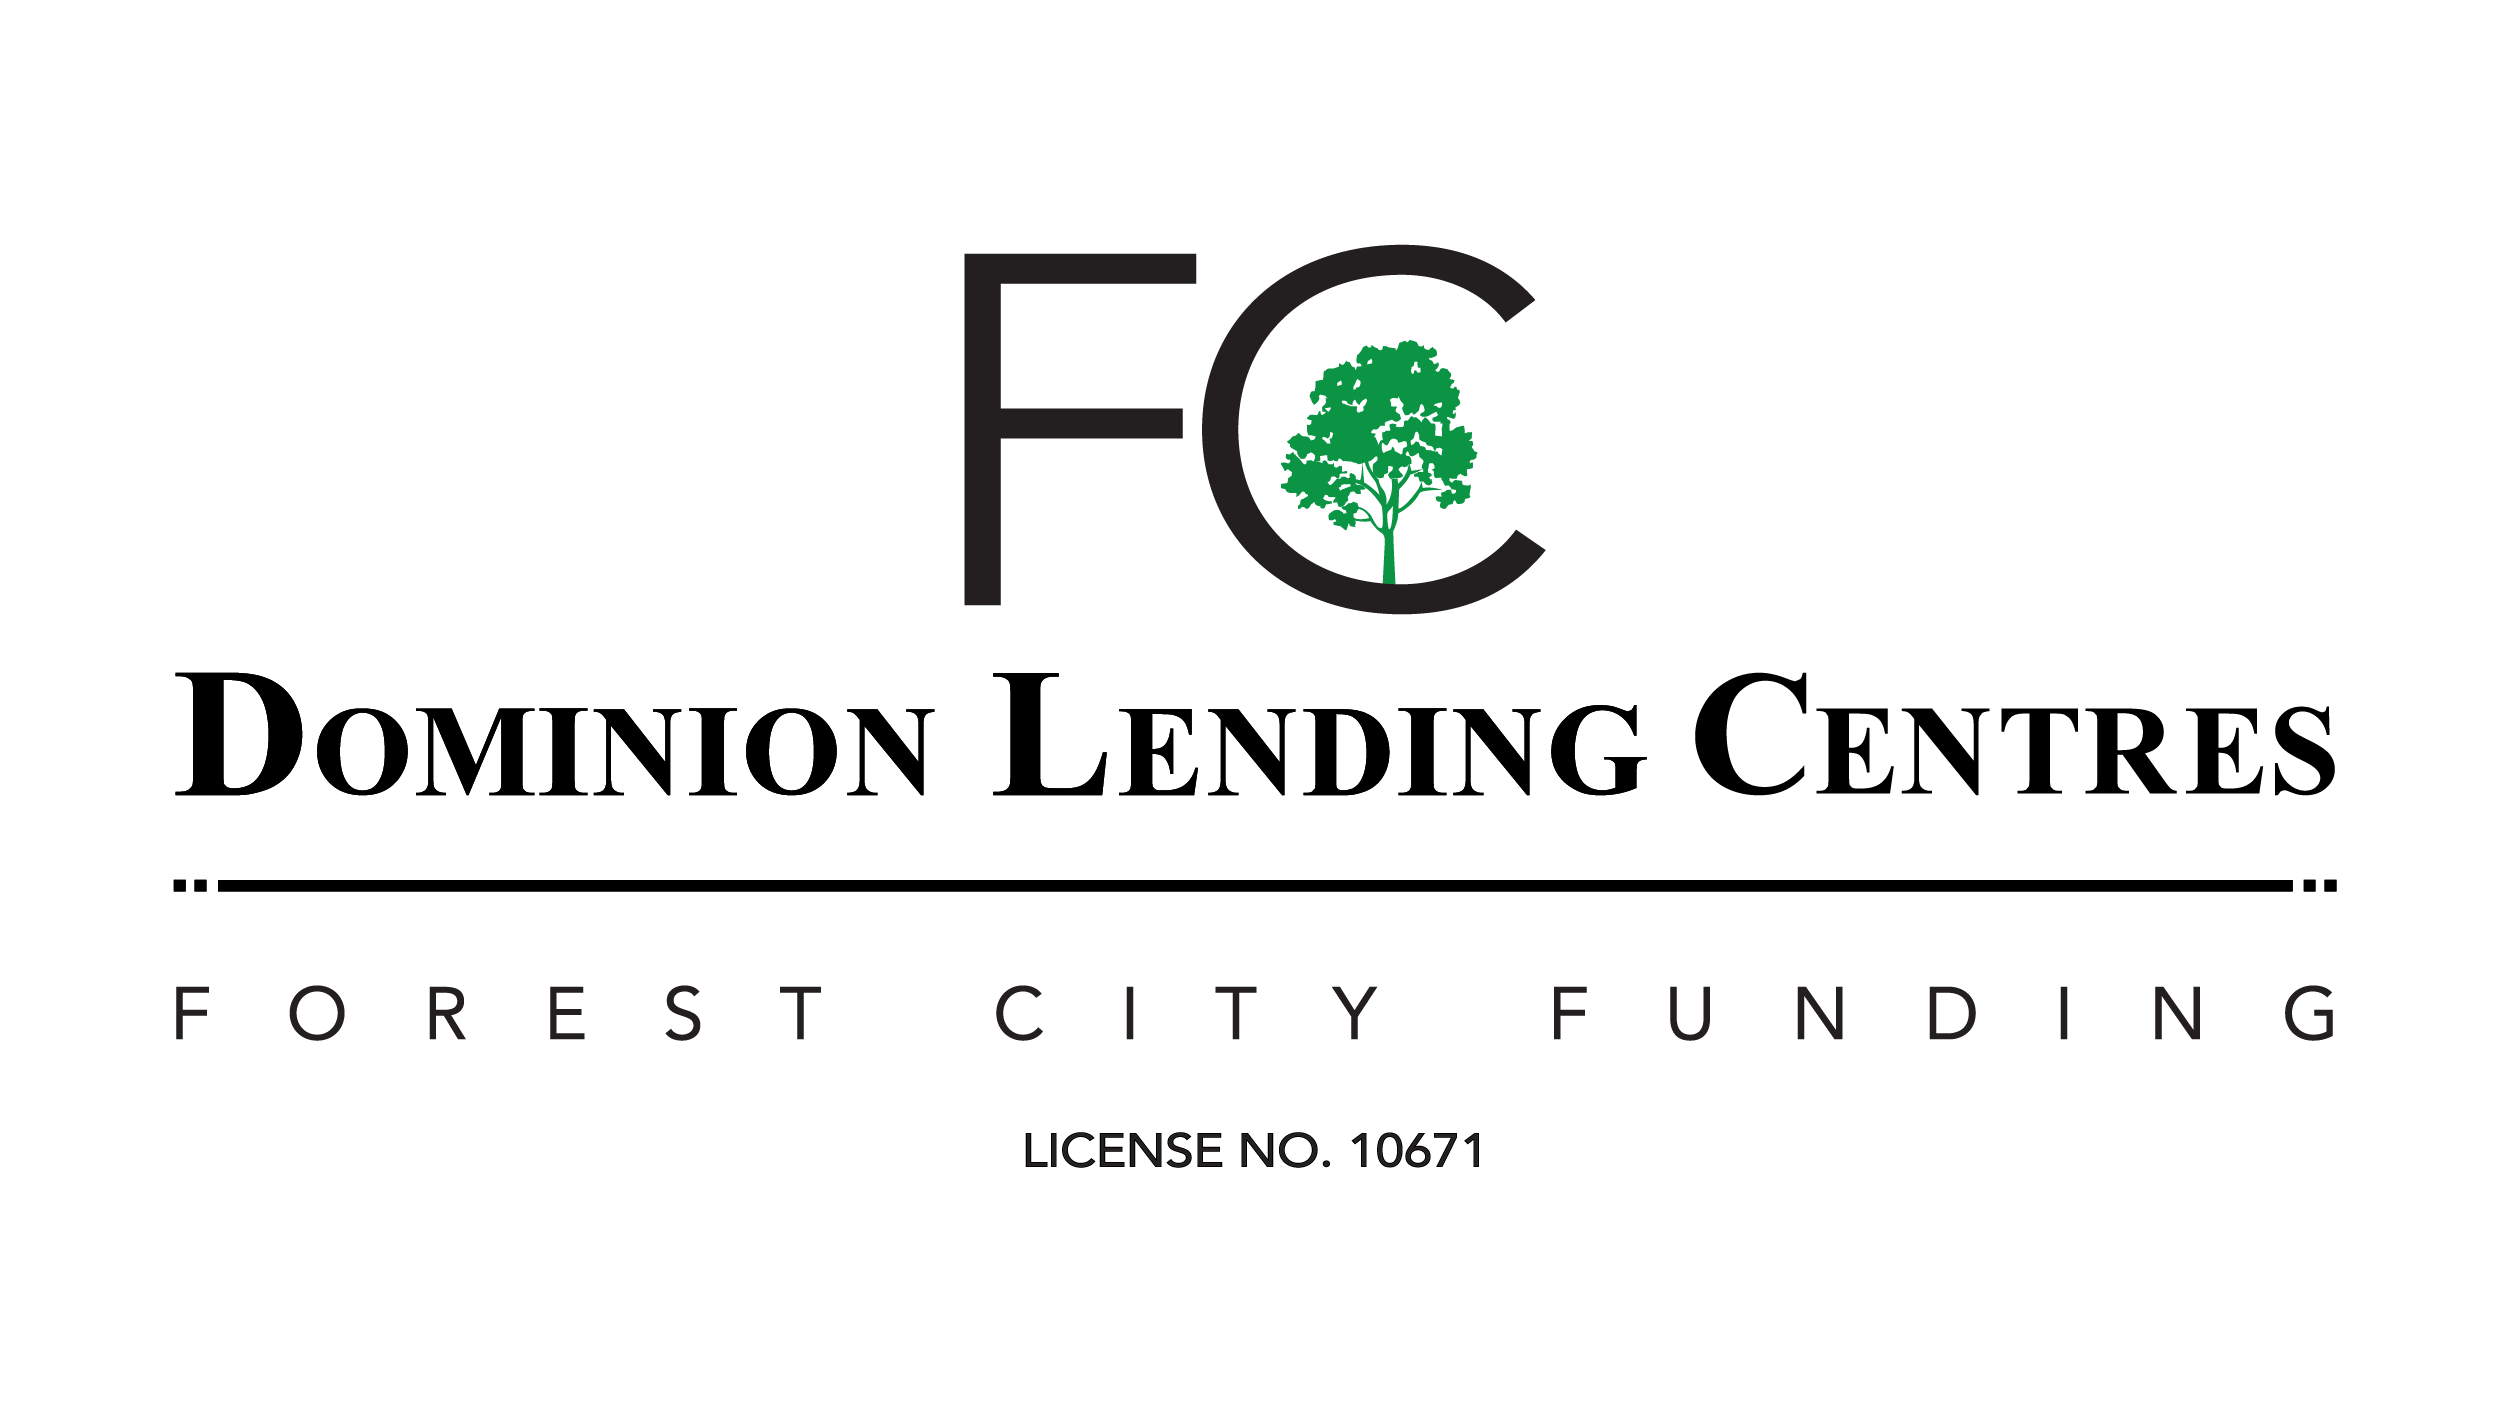 Dominion Lending Centers - City of Forest Funding, Thursday August 18, 2022, photo from press release